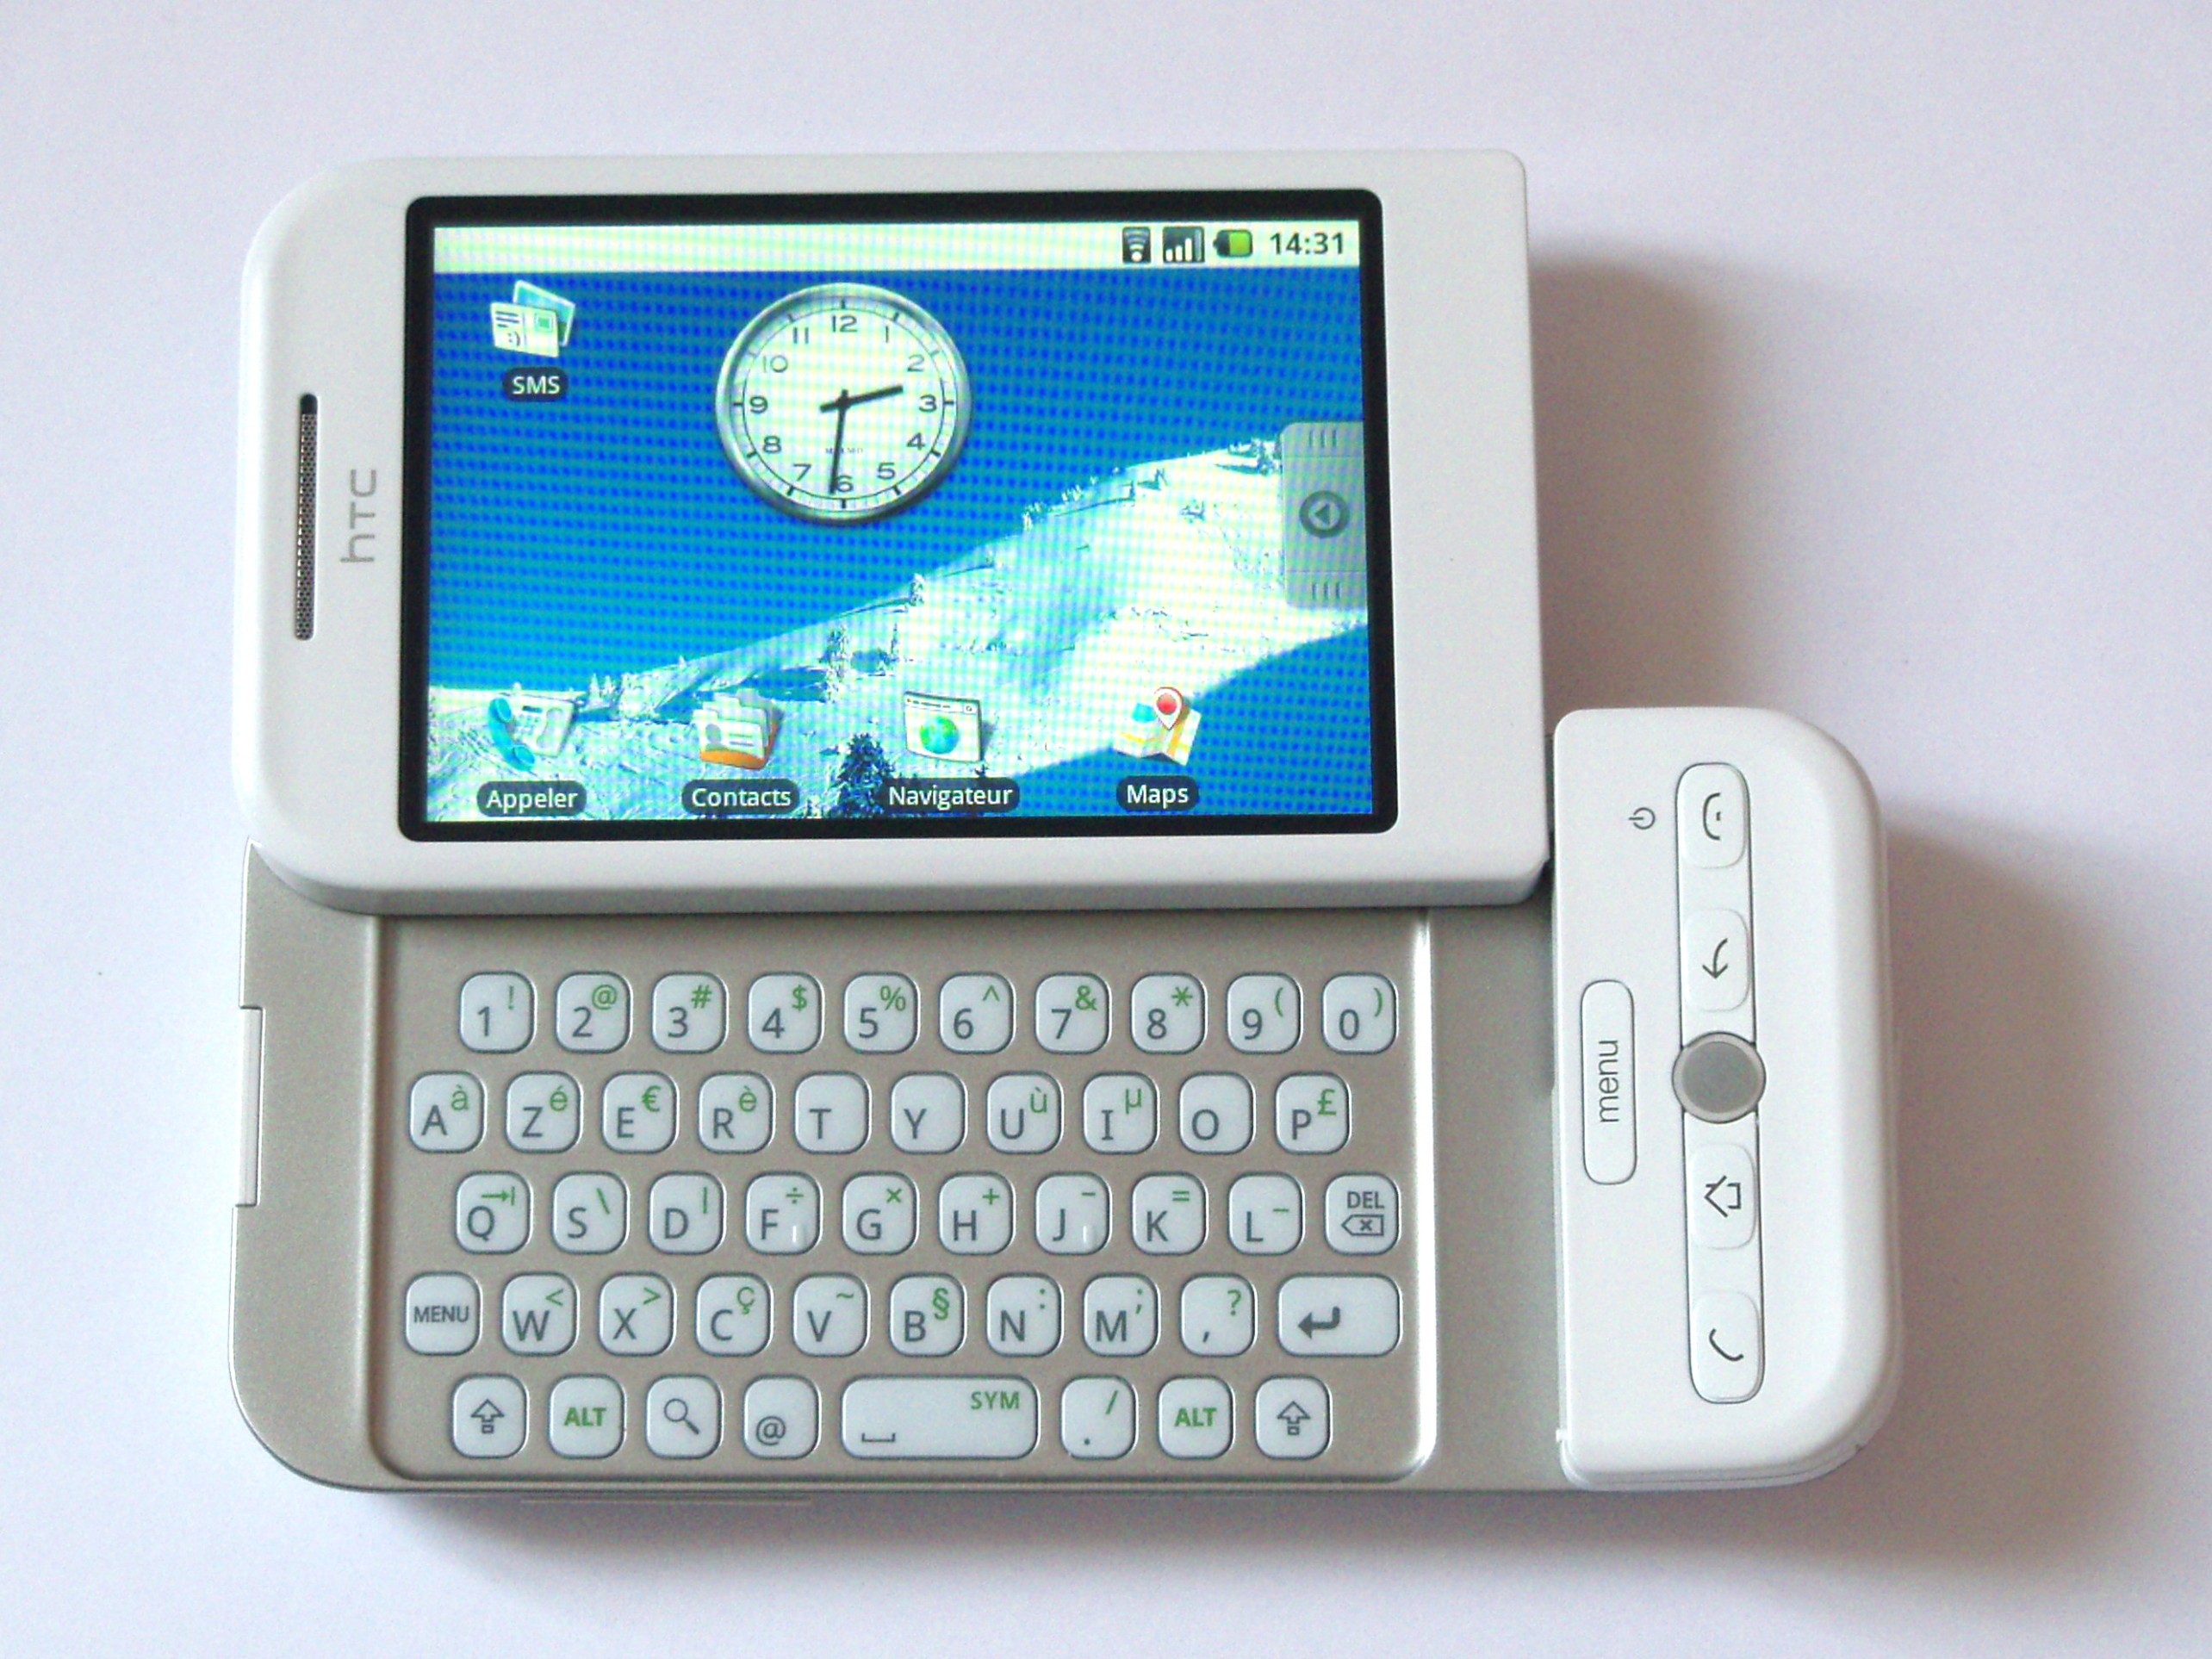 Remember: The First Android Smartphone Was the HTC Dream or Google G1